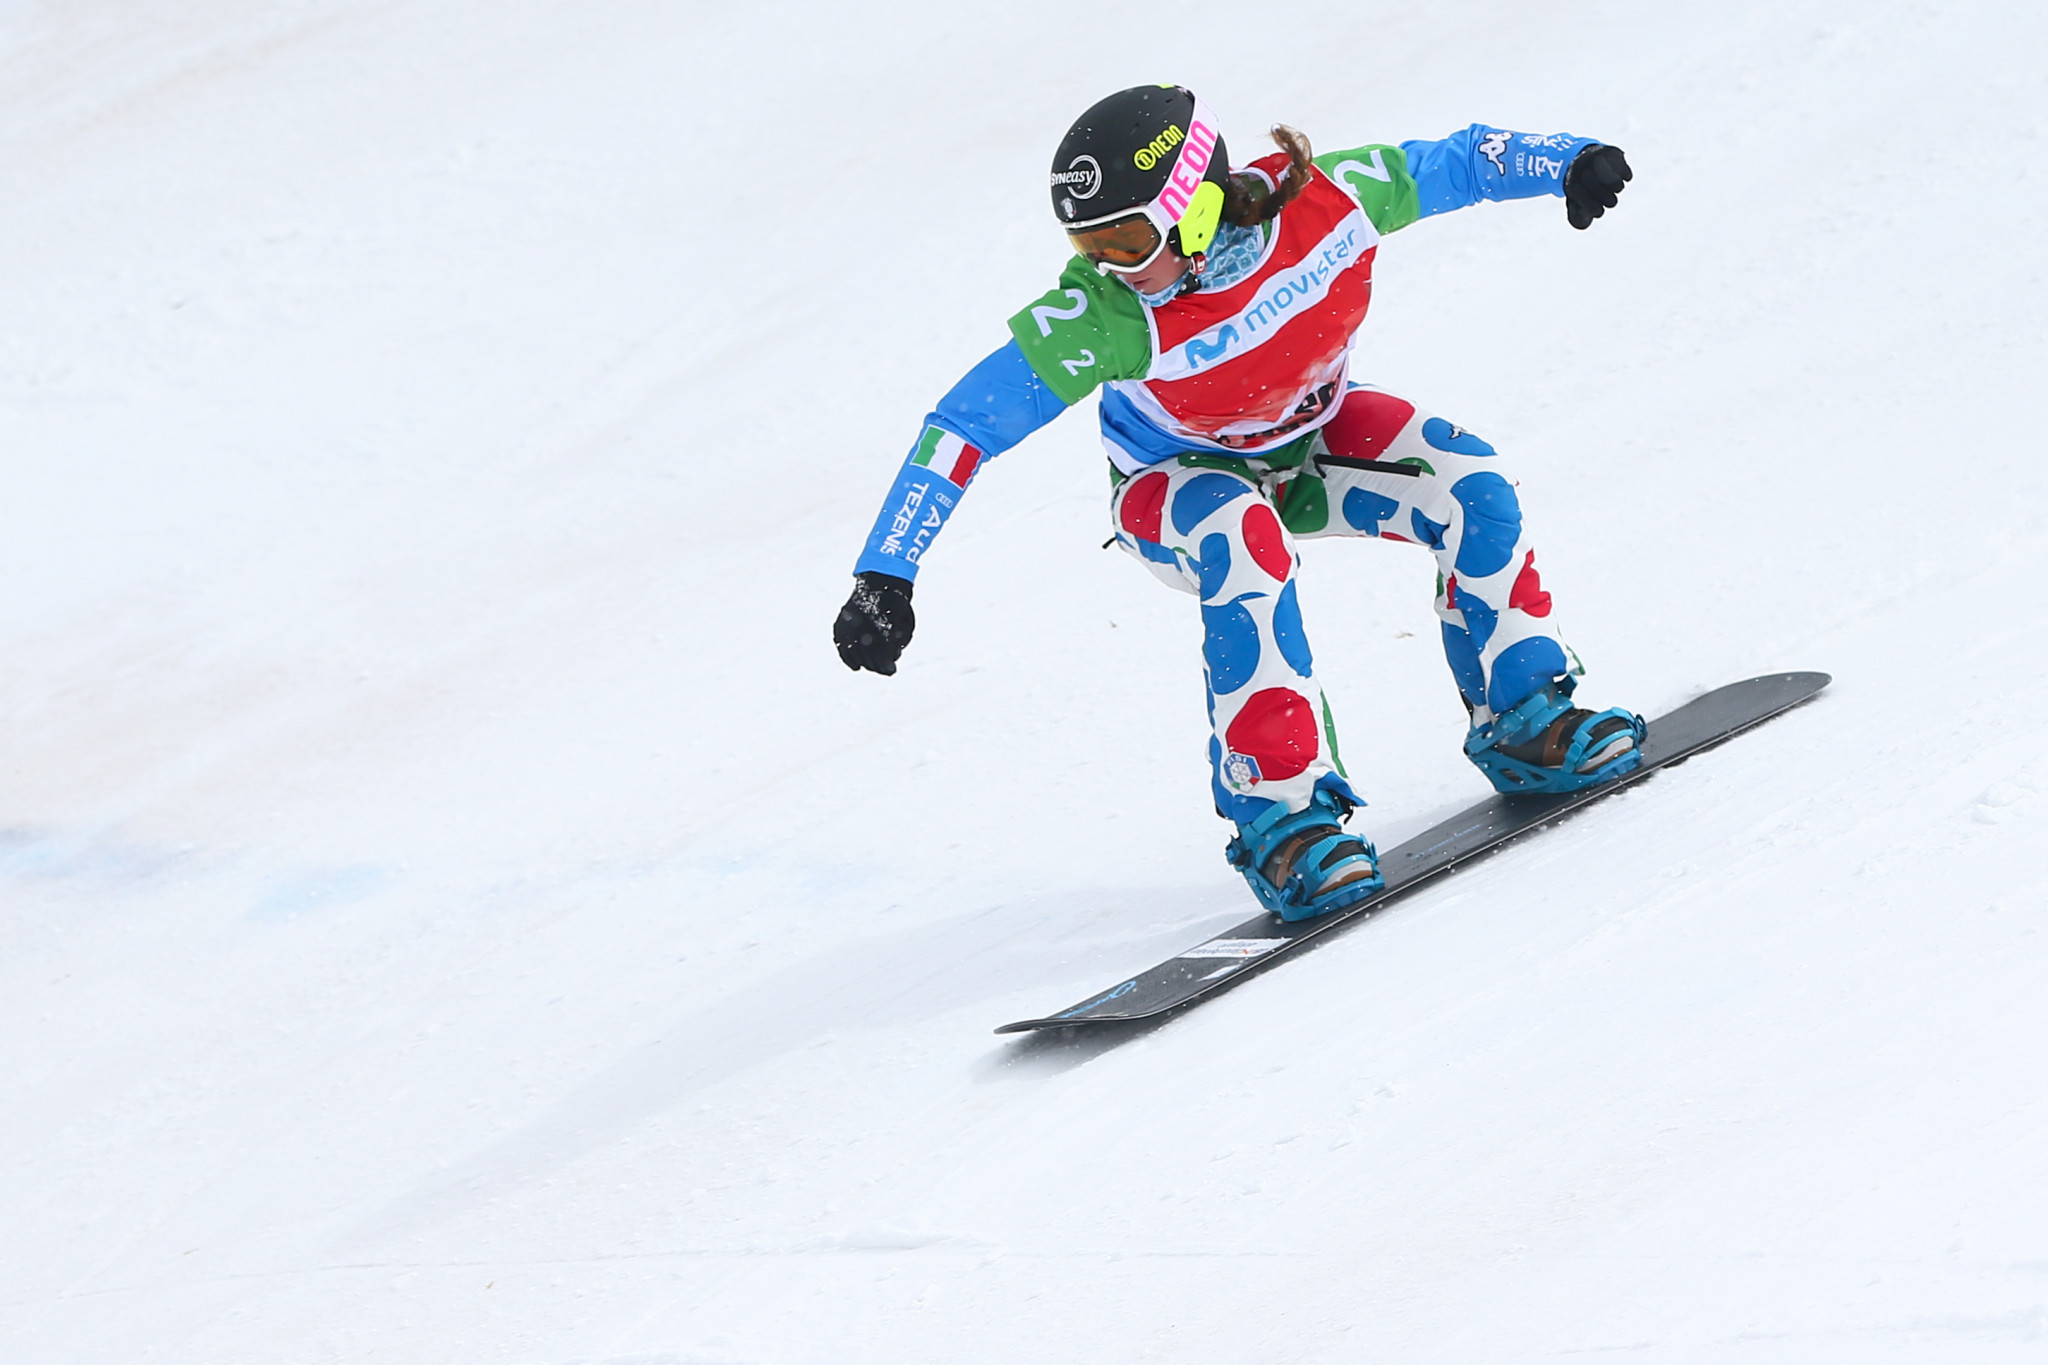 Michela Moioli heads the women's Snowboard Cross World Cup standings by just 30 points ©Getty Images